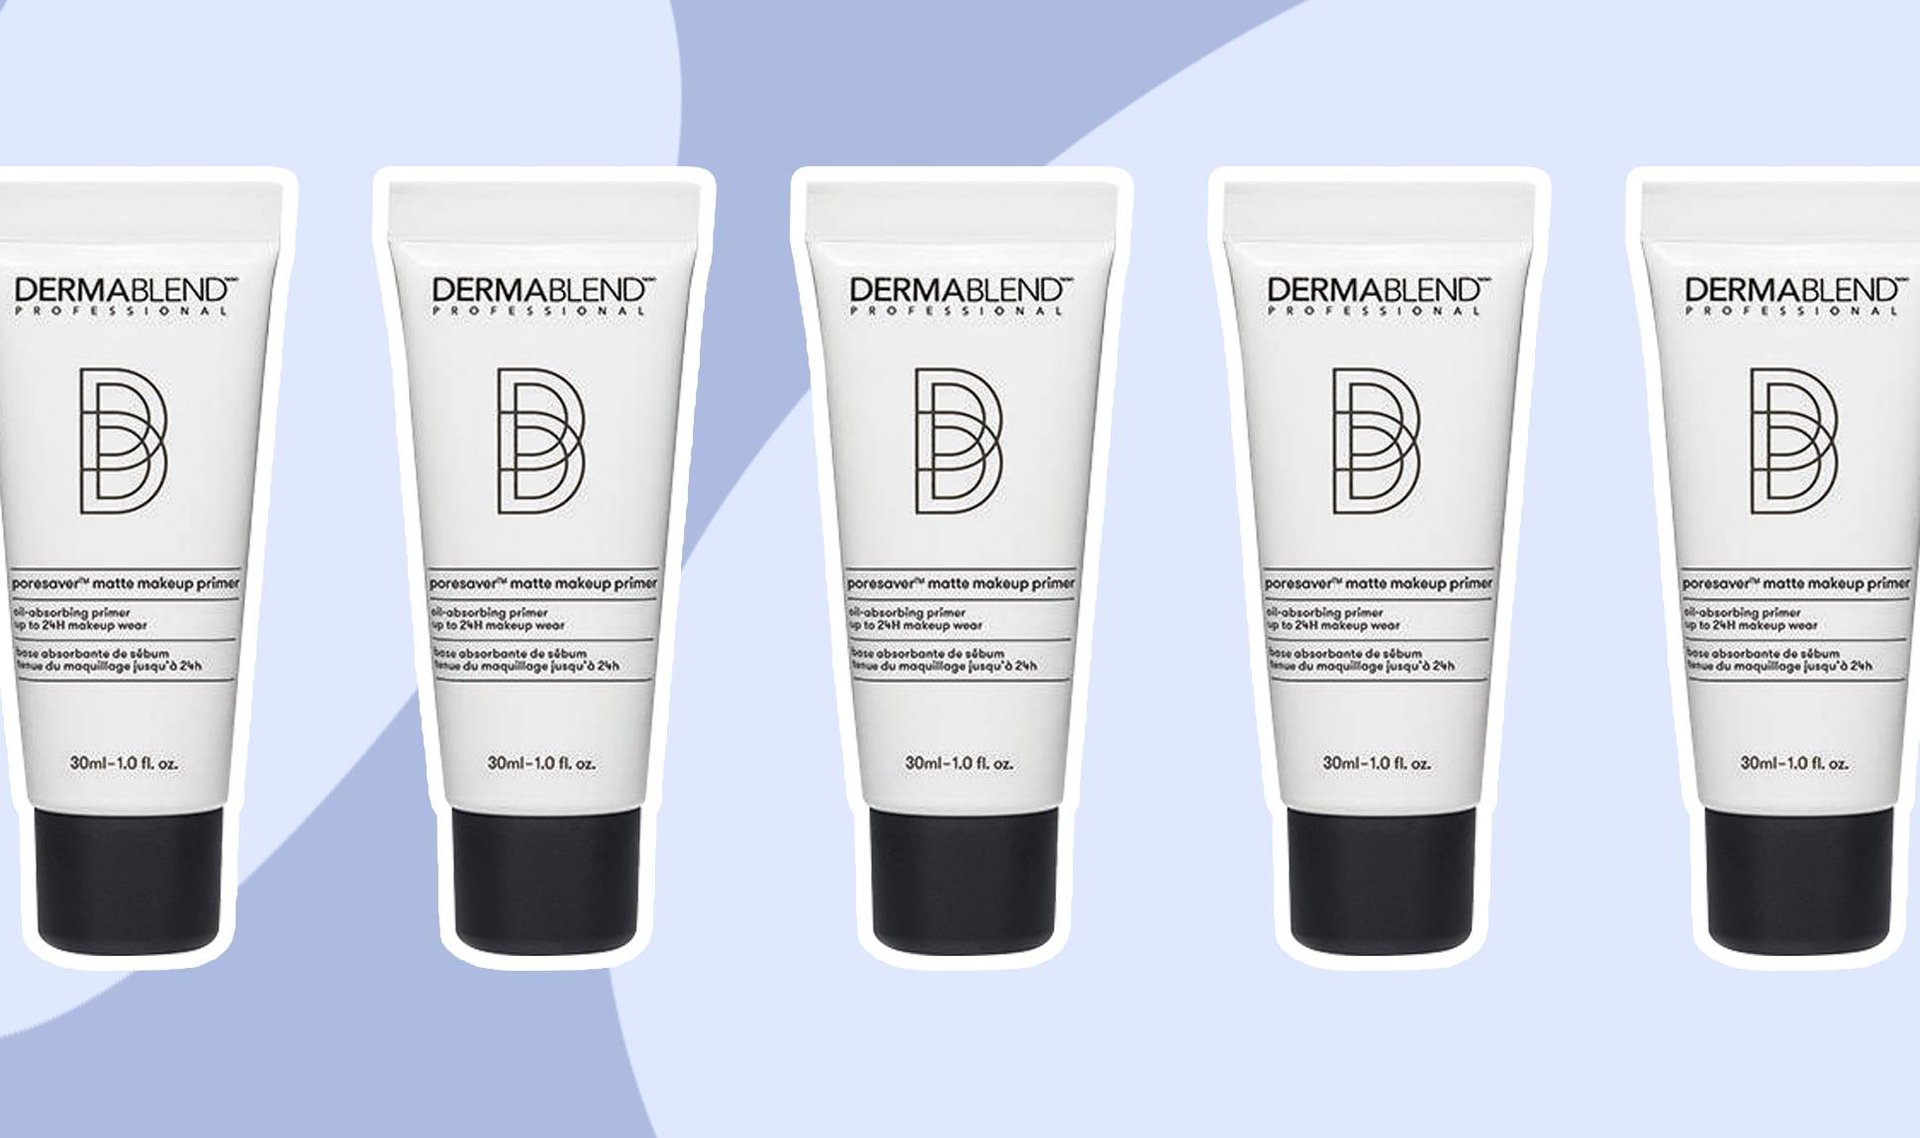 If You Have Oily Skin, Say Hello To Dermablend’s New Poresaver Primer